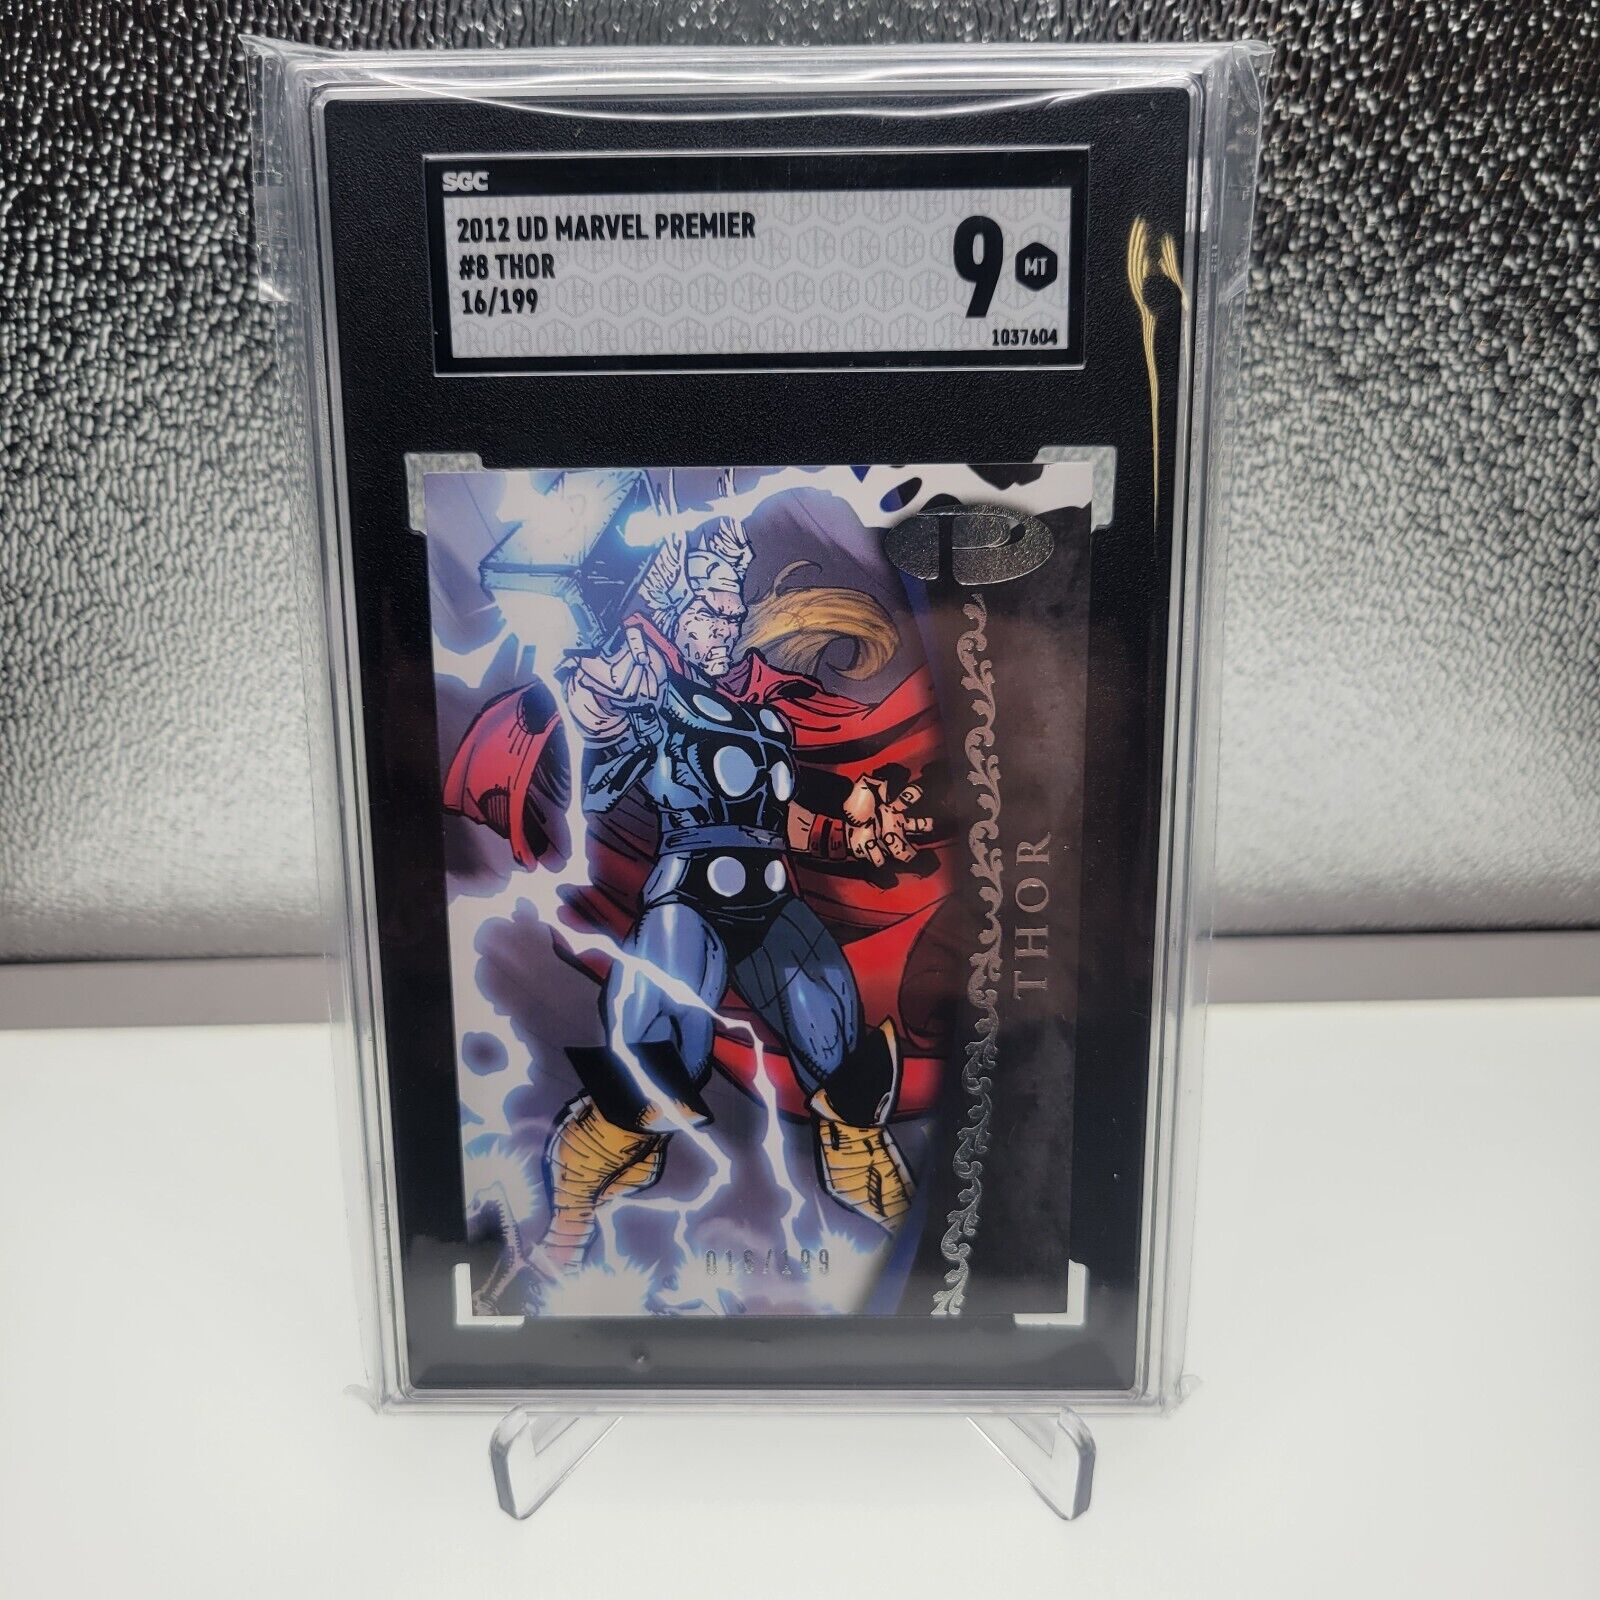 2012 UD Marvel Premiere Thor #8 Card, SGC 9 Mint /199 Rare Collectible